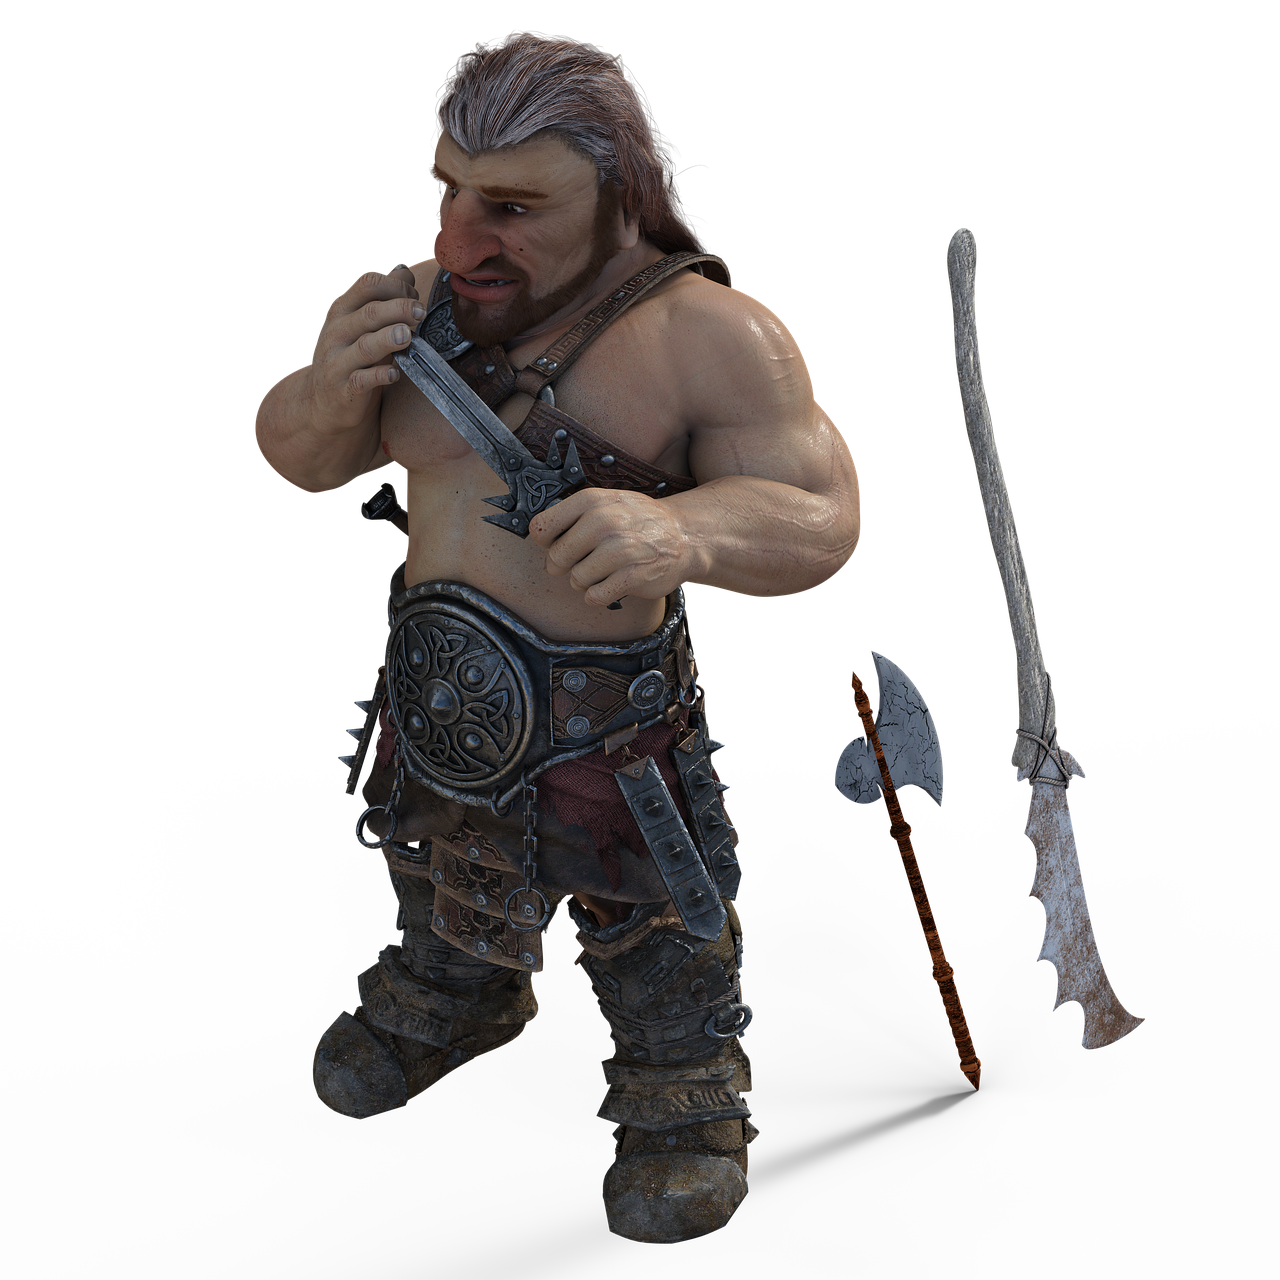 a close up of a person with a sword, inspired by János Saxon-Szász, polycount contest winner, wearing barbarian caveman pelt, realistic rock figurine, ingame image, holding scimitar made of bone